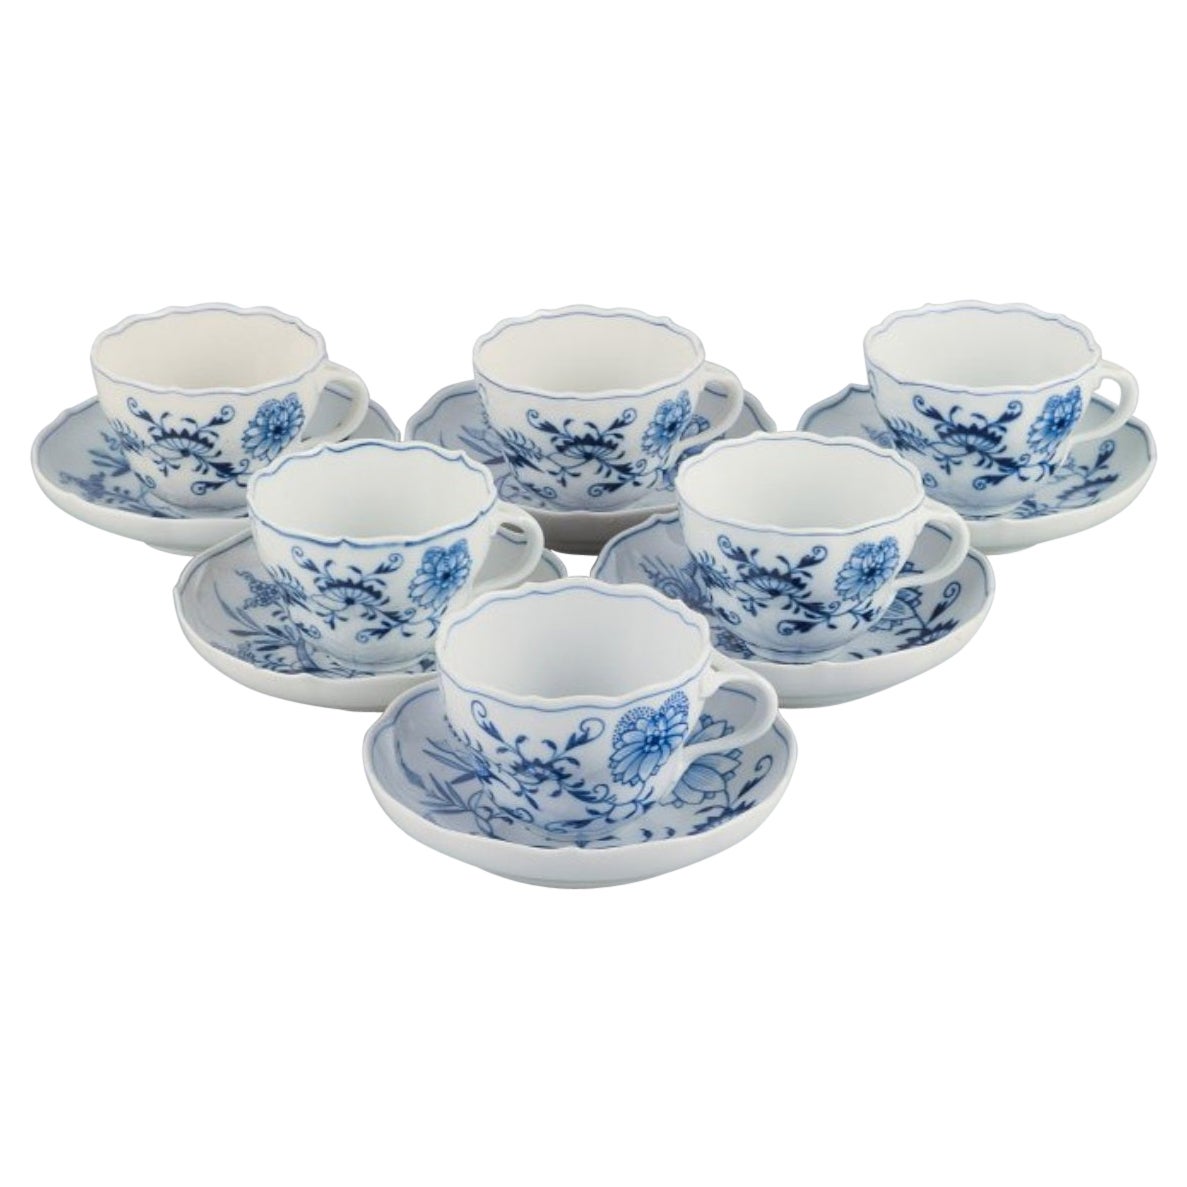 Meissen, Germany, Six Meissen Blue Onion Coffee Cups with Saucers in Porcelain